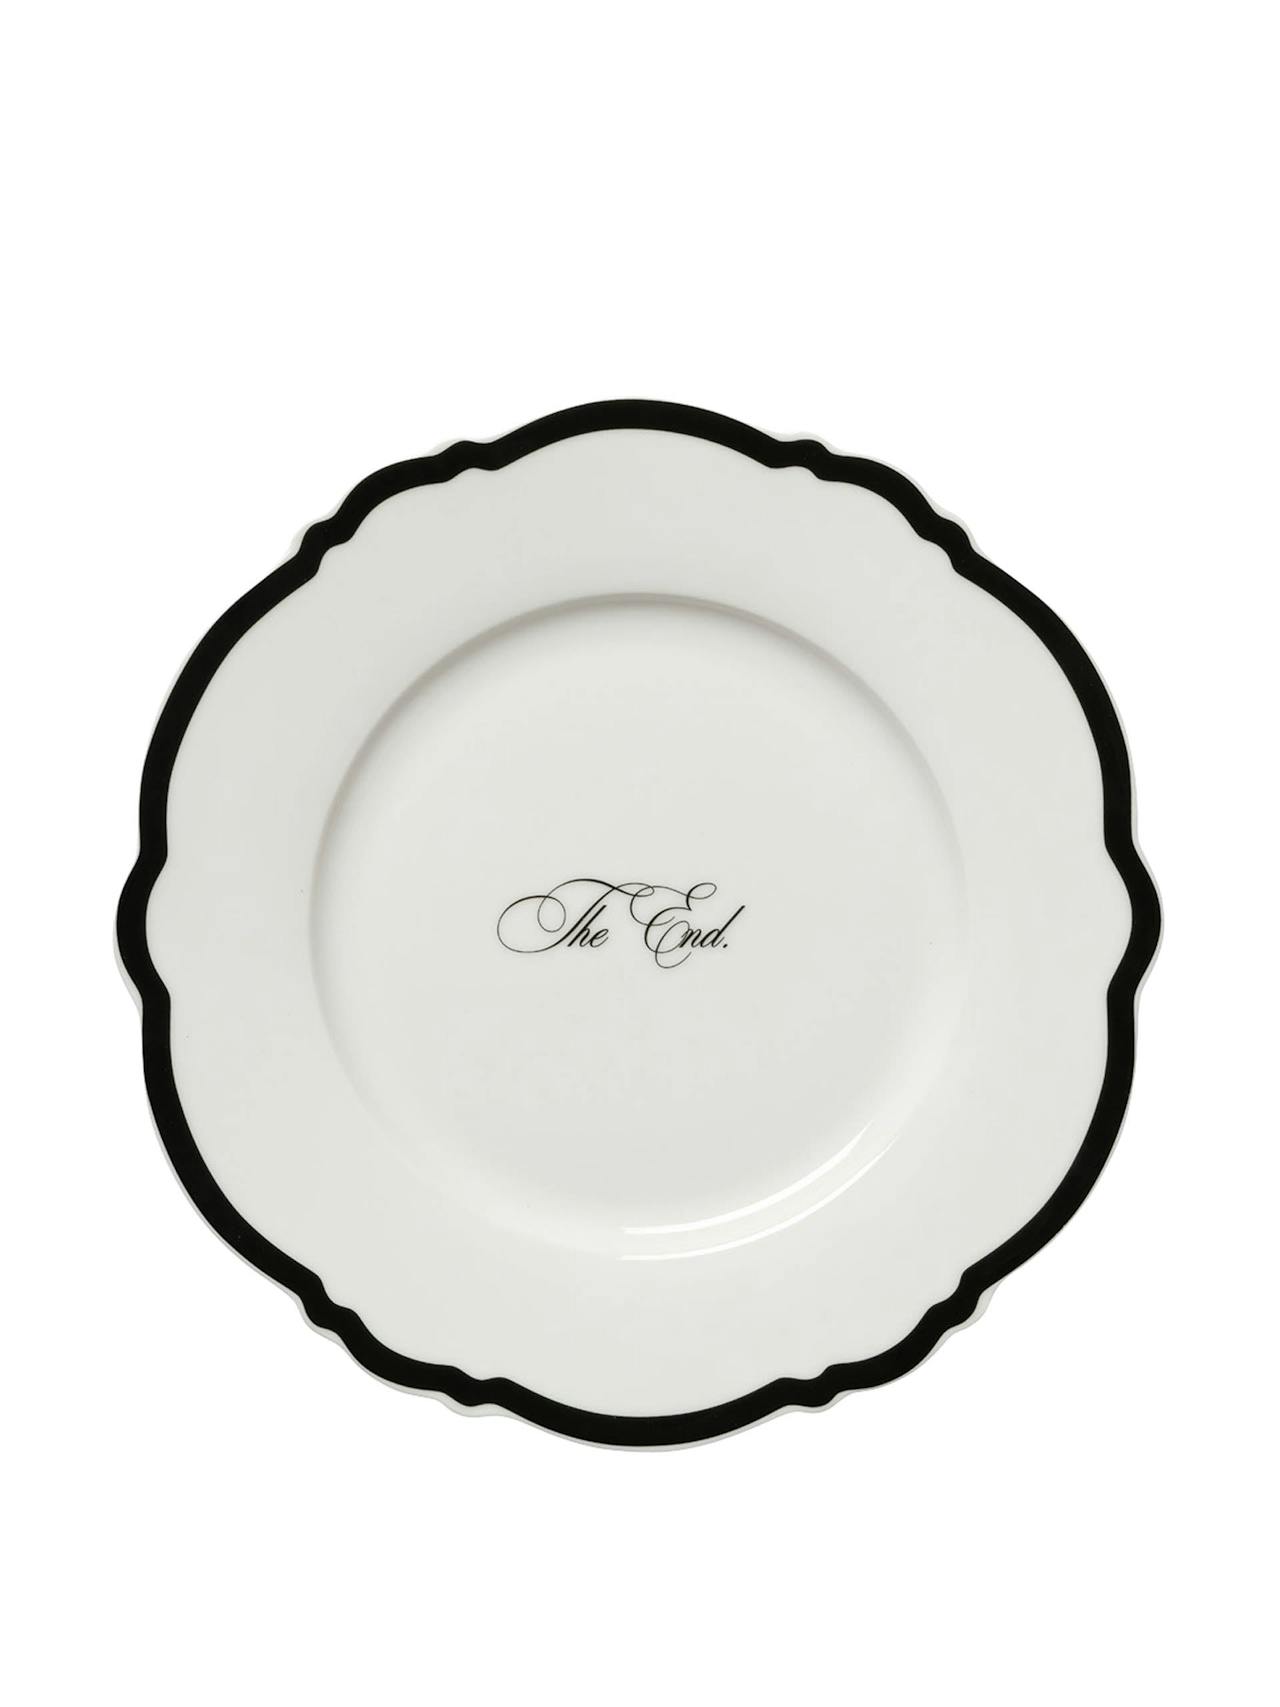 The end side plate set